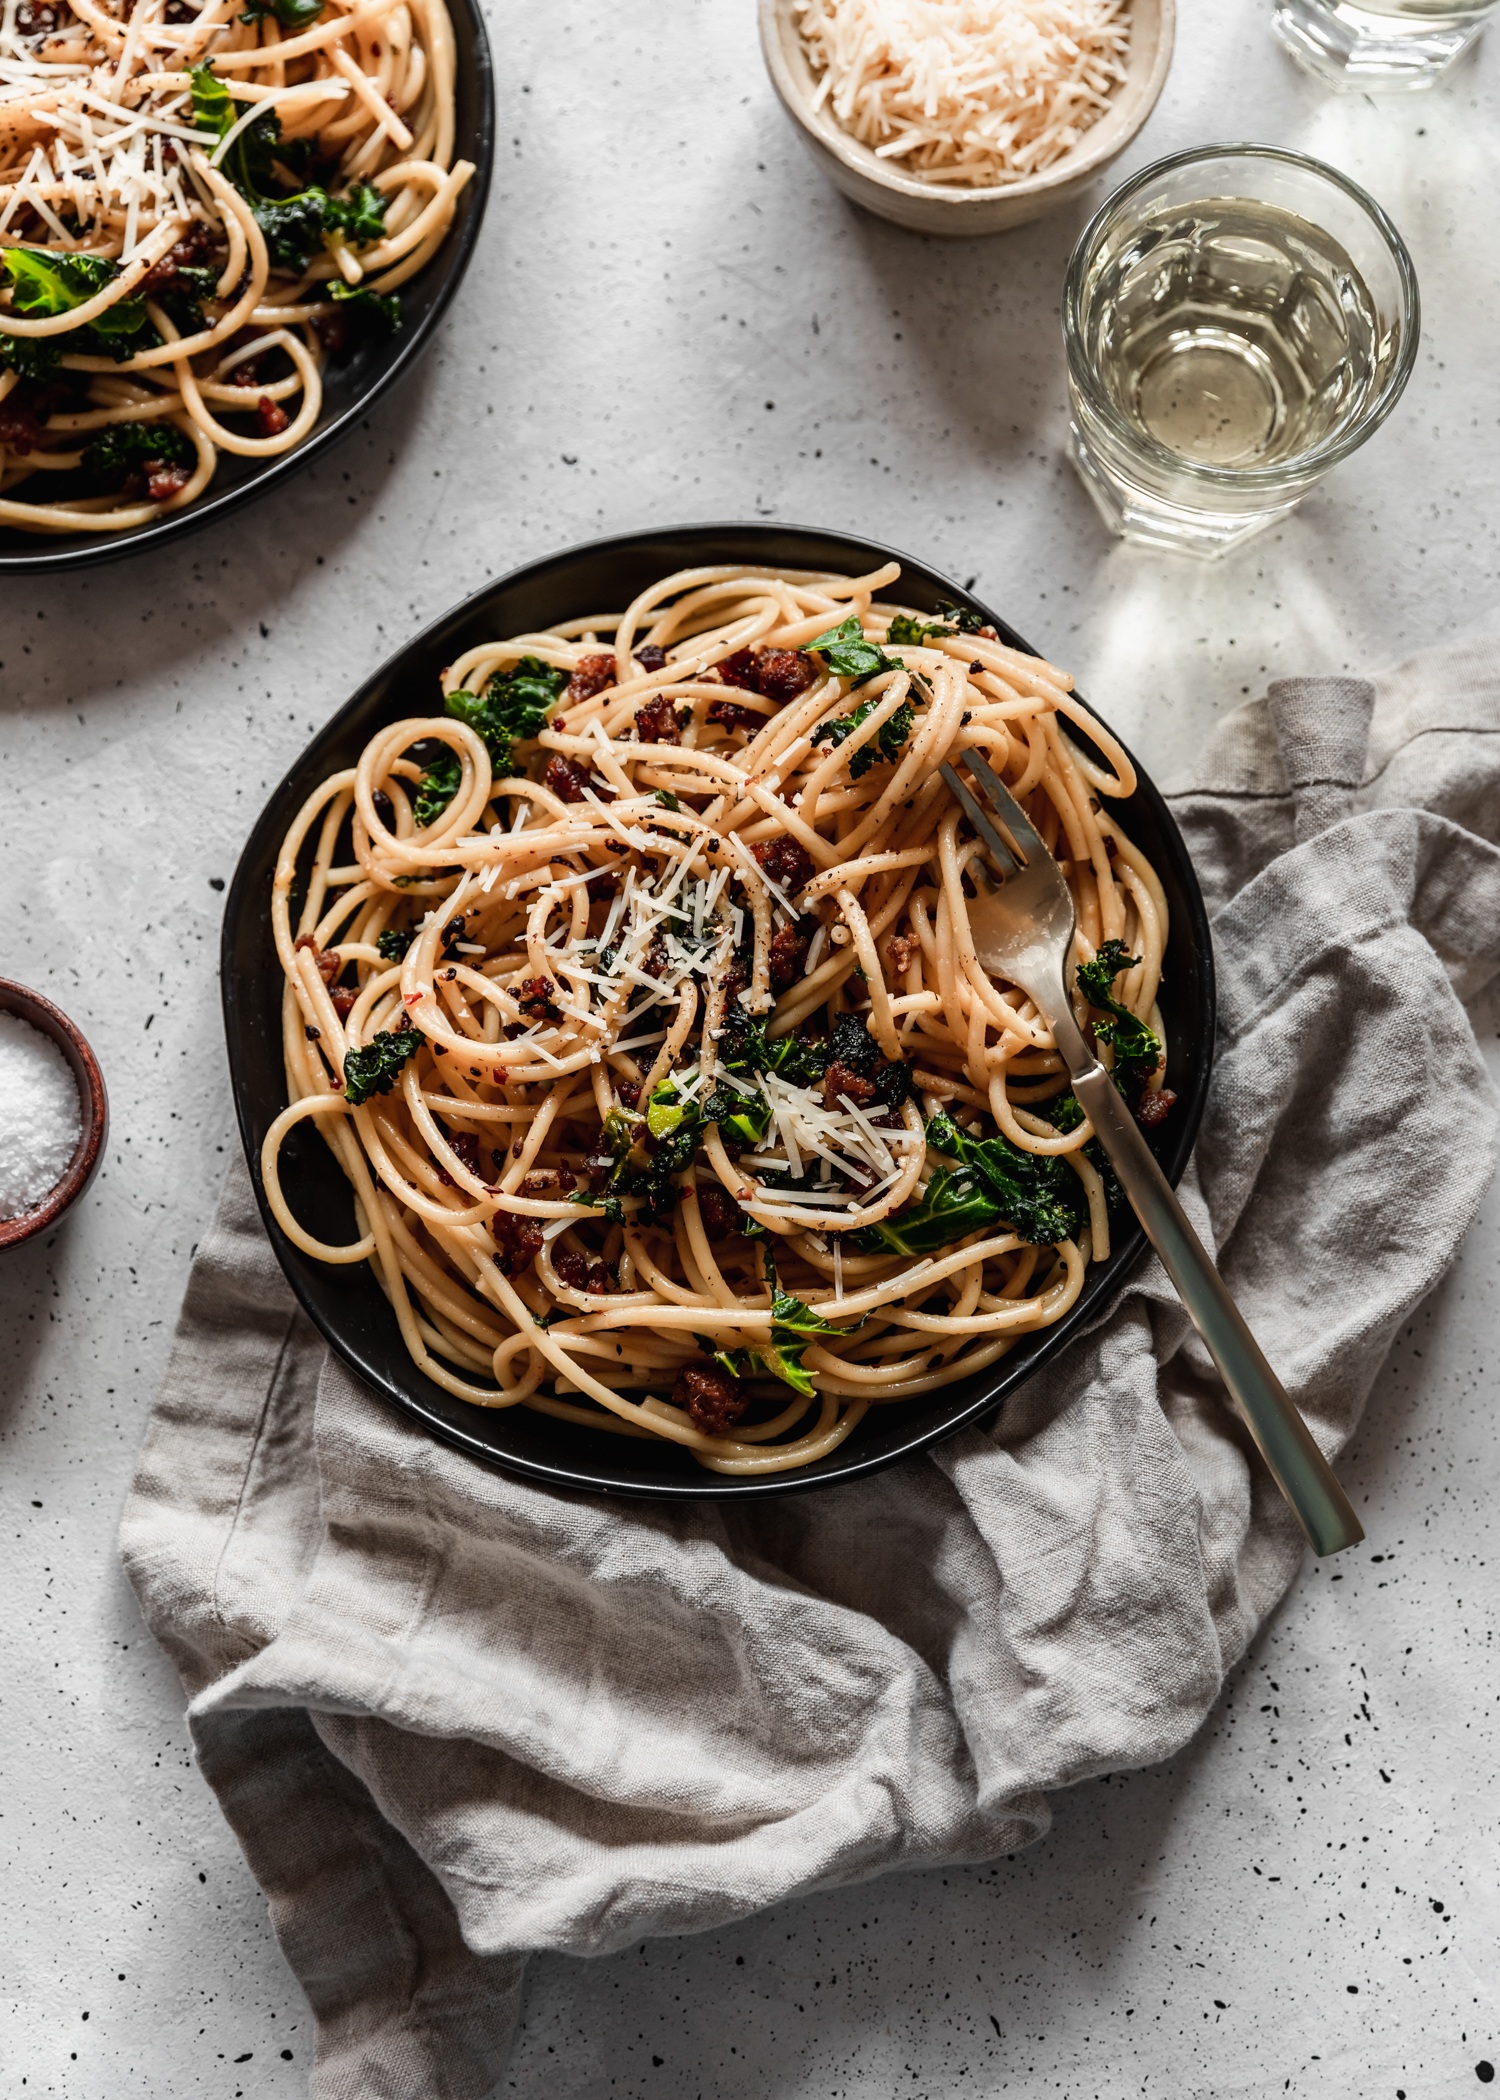 An overhead image of a black plate with bucatini carbonara, sausage, and kale placed on a grey linen on a grey speckled table surrounded by another plate of pasta, wine, and a small wood bowl of salt.